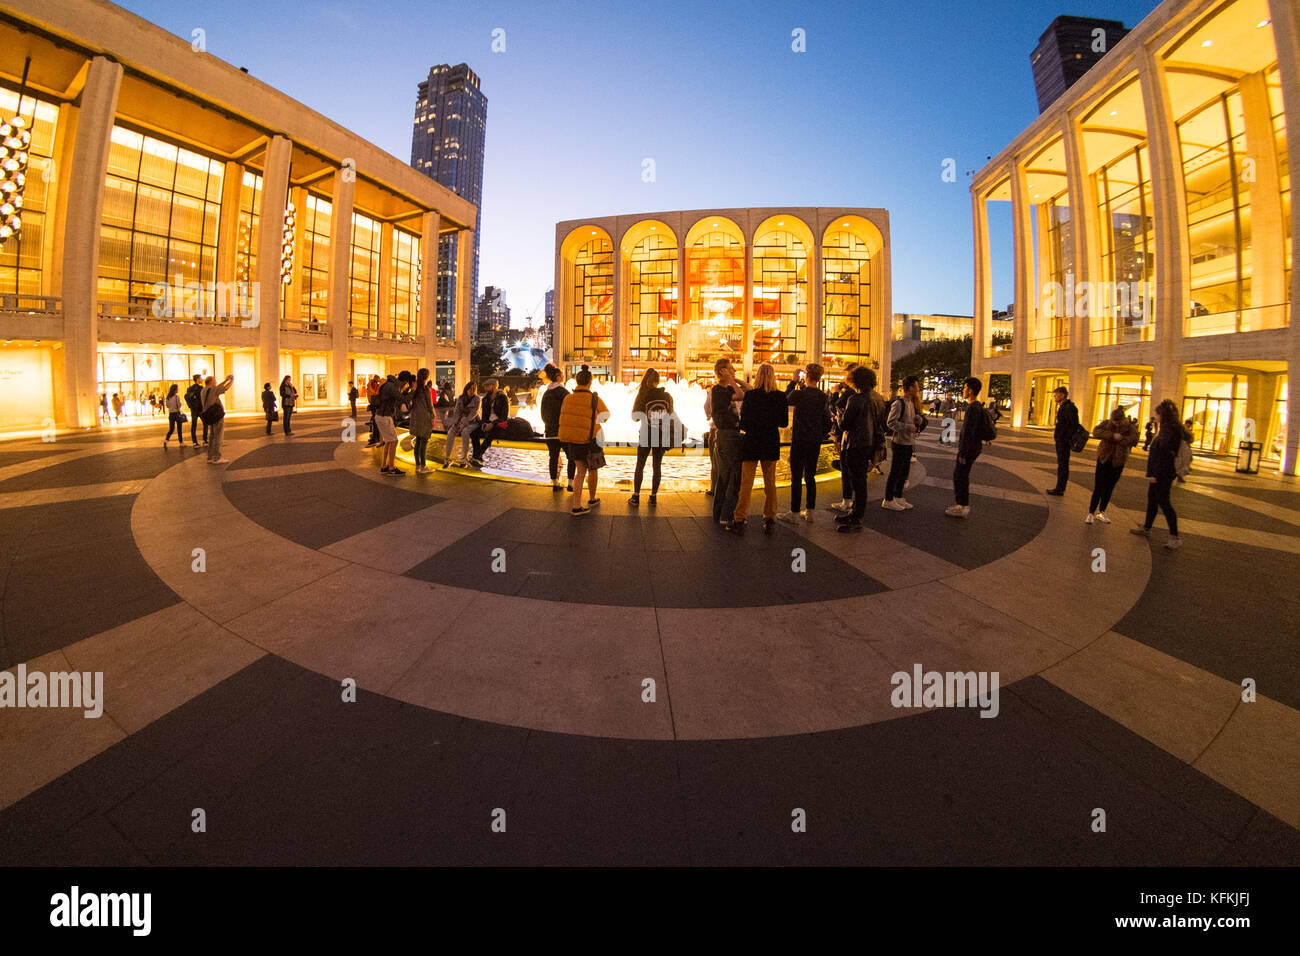 Lincoln Center for the Performing Arts, Manhattan, New York City, NY, United States of America. USA Stock Photo